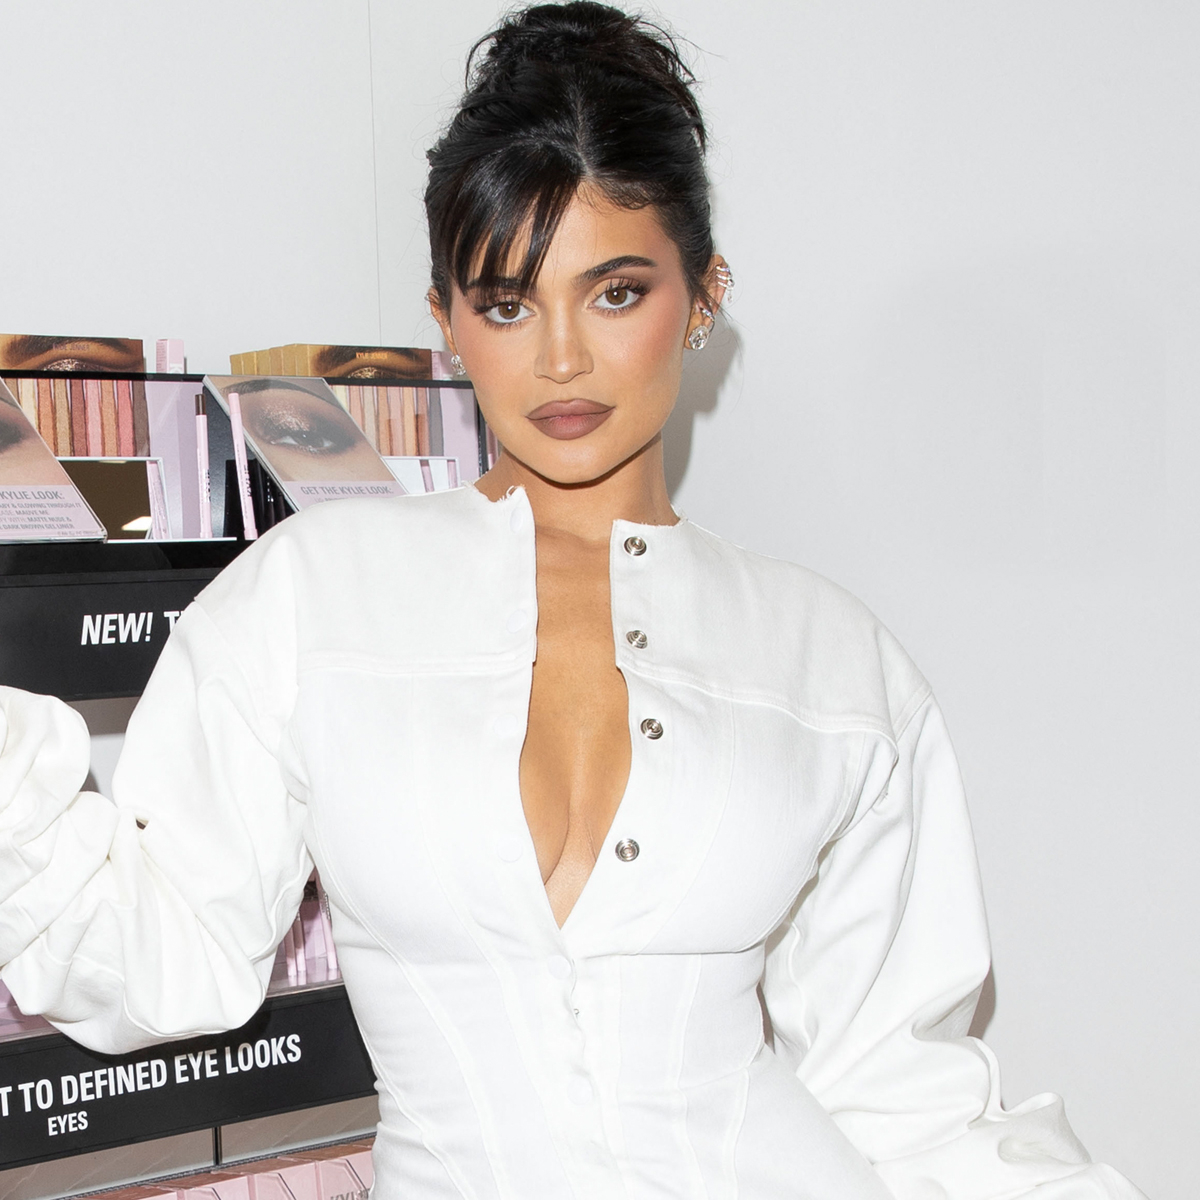 How Kylie Jenner Used Makeup as a Tool to Help With Her Insecurities